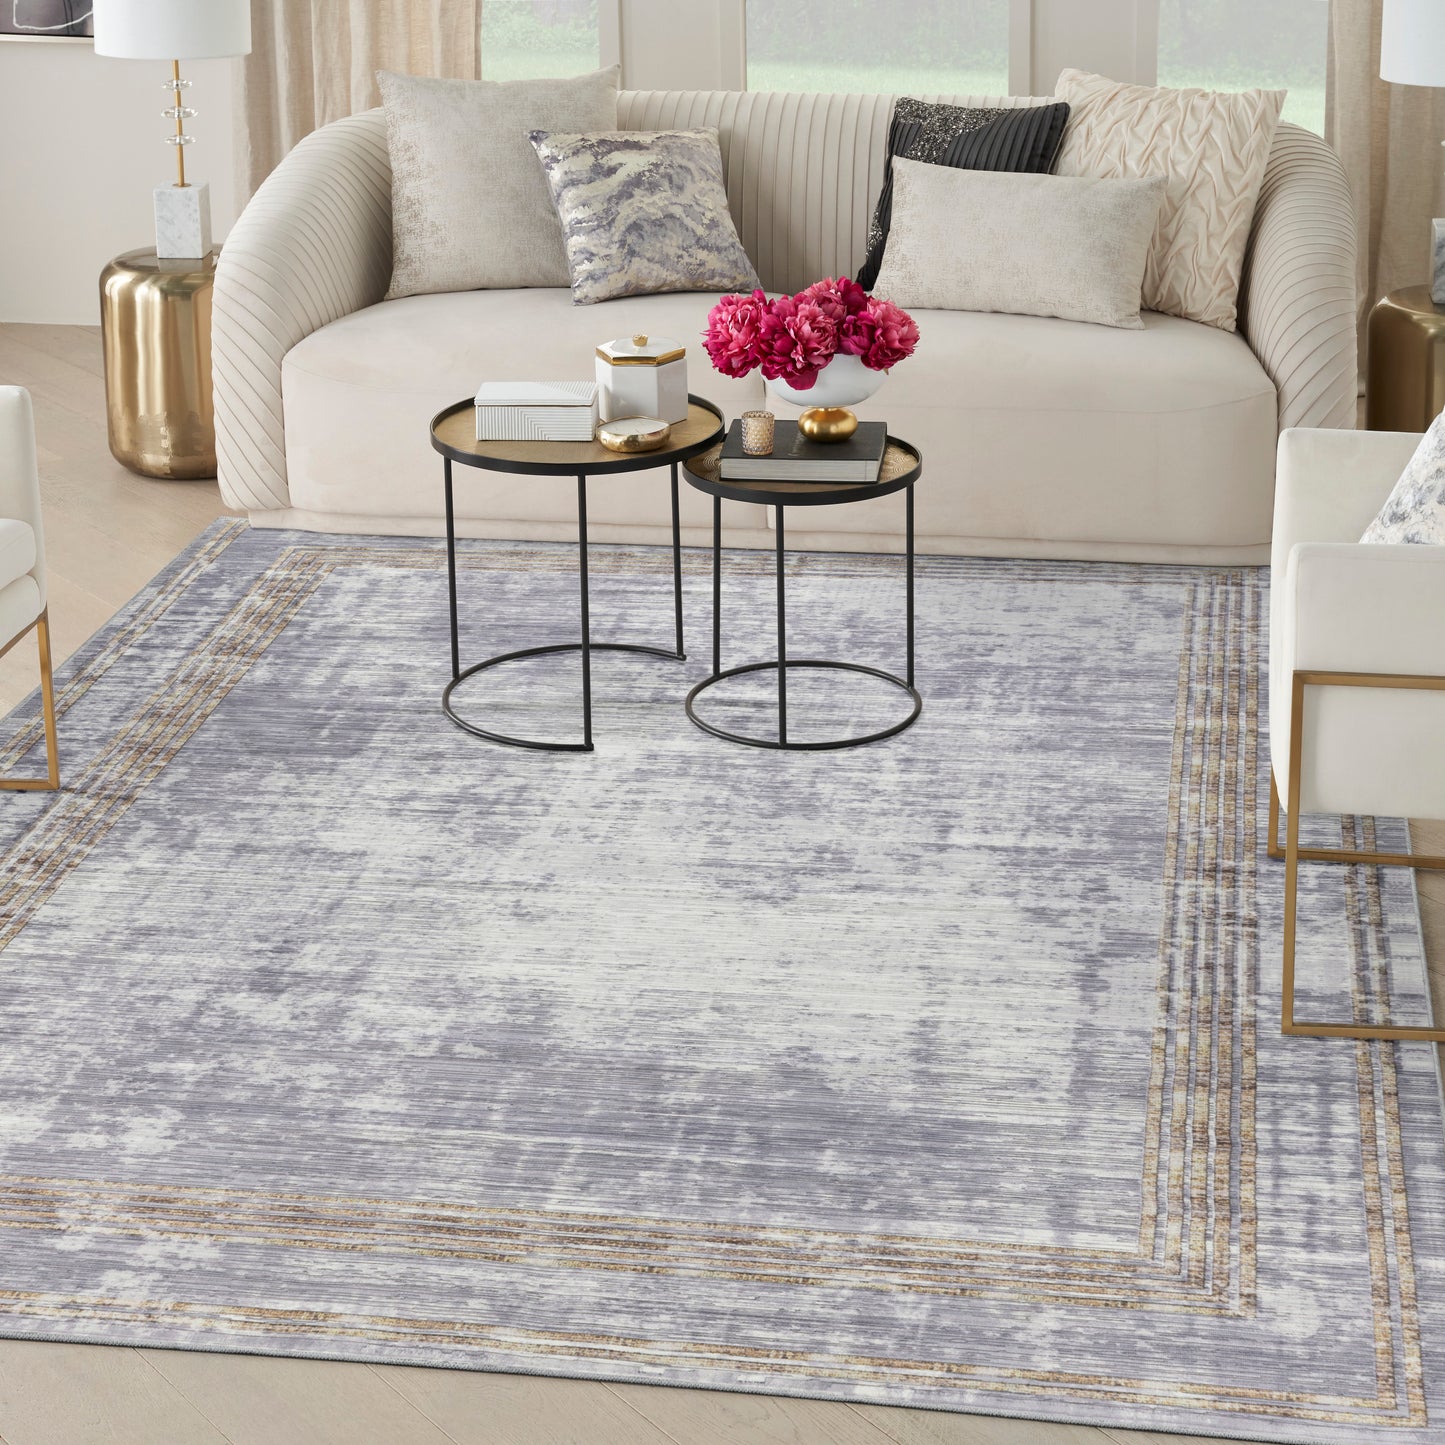 Inspire Me! Home Décor Daydream DDR03 Silver  Contemporary Machinemade Rug